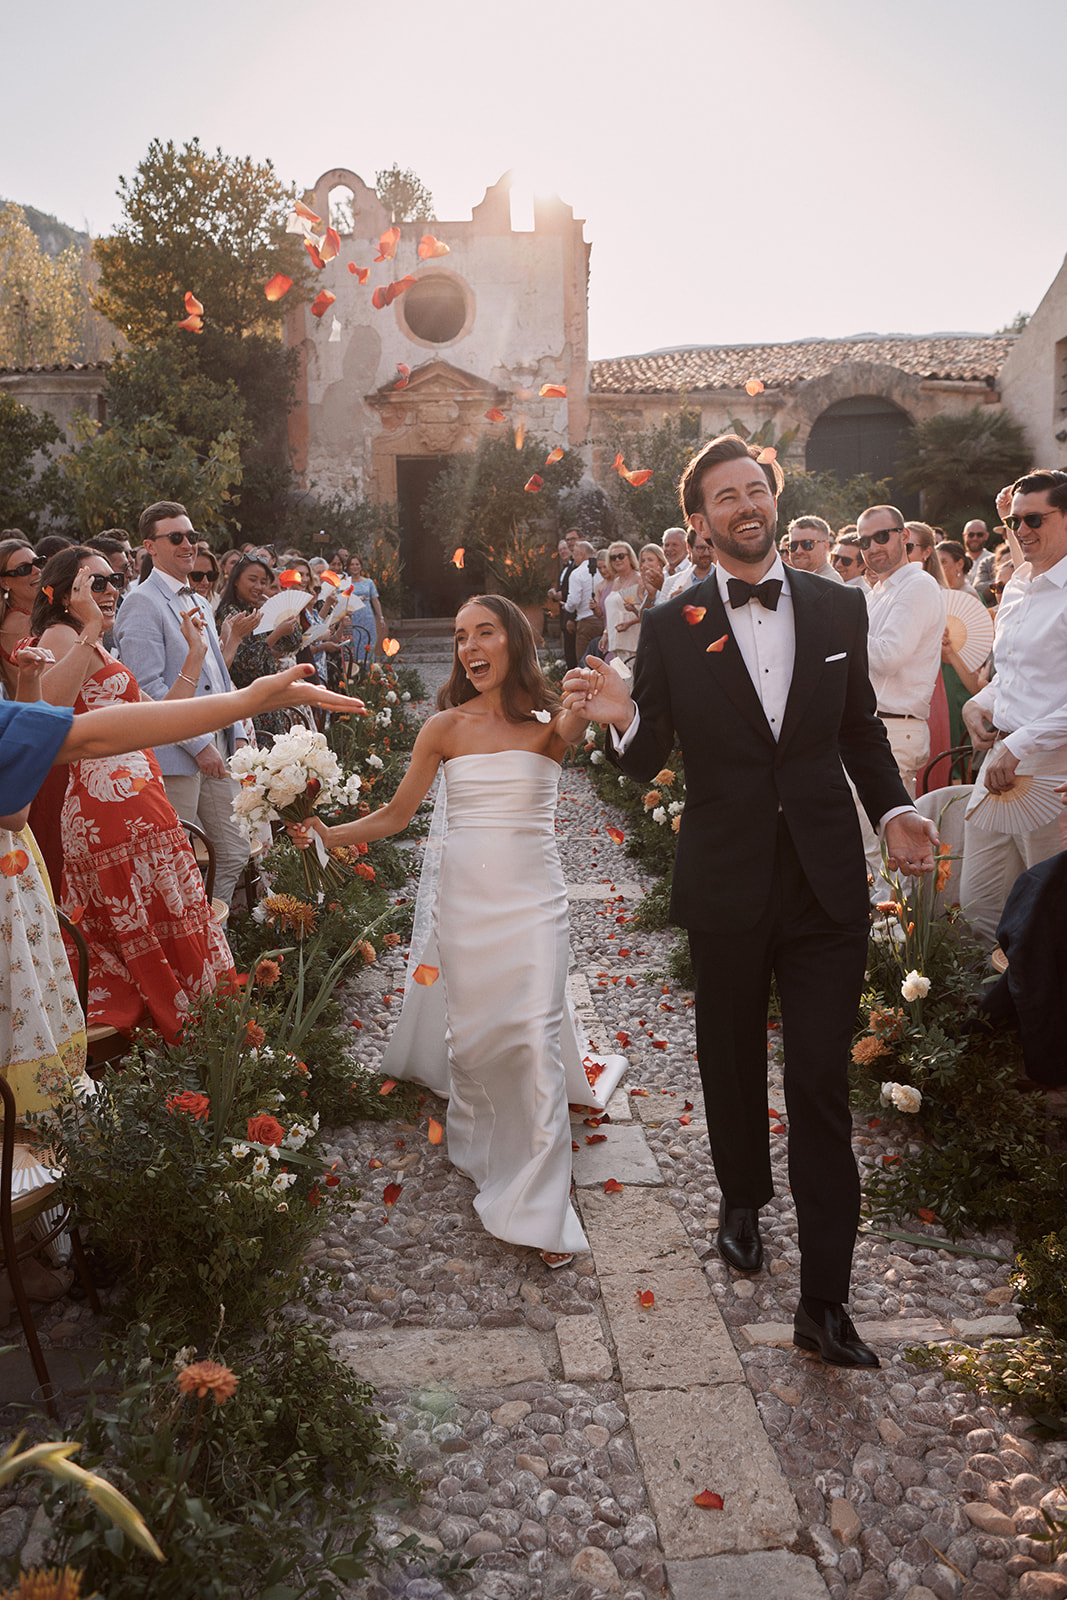 Bride and groom with rose petal confetti at their wedding in Italy. Wiskow and White Italian wedding planners.